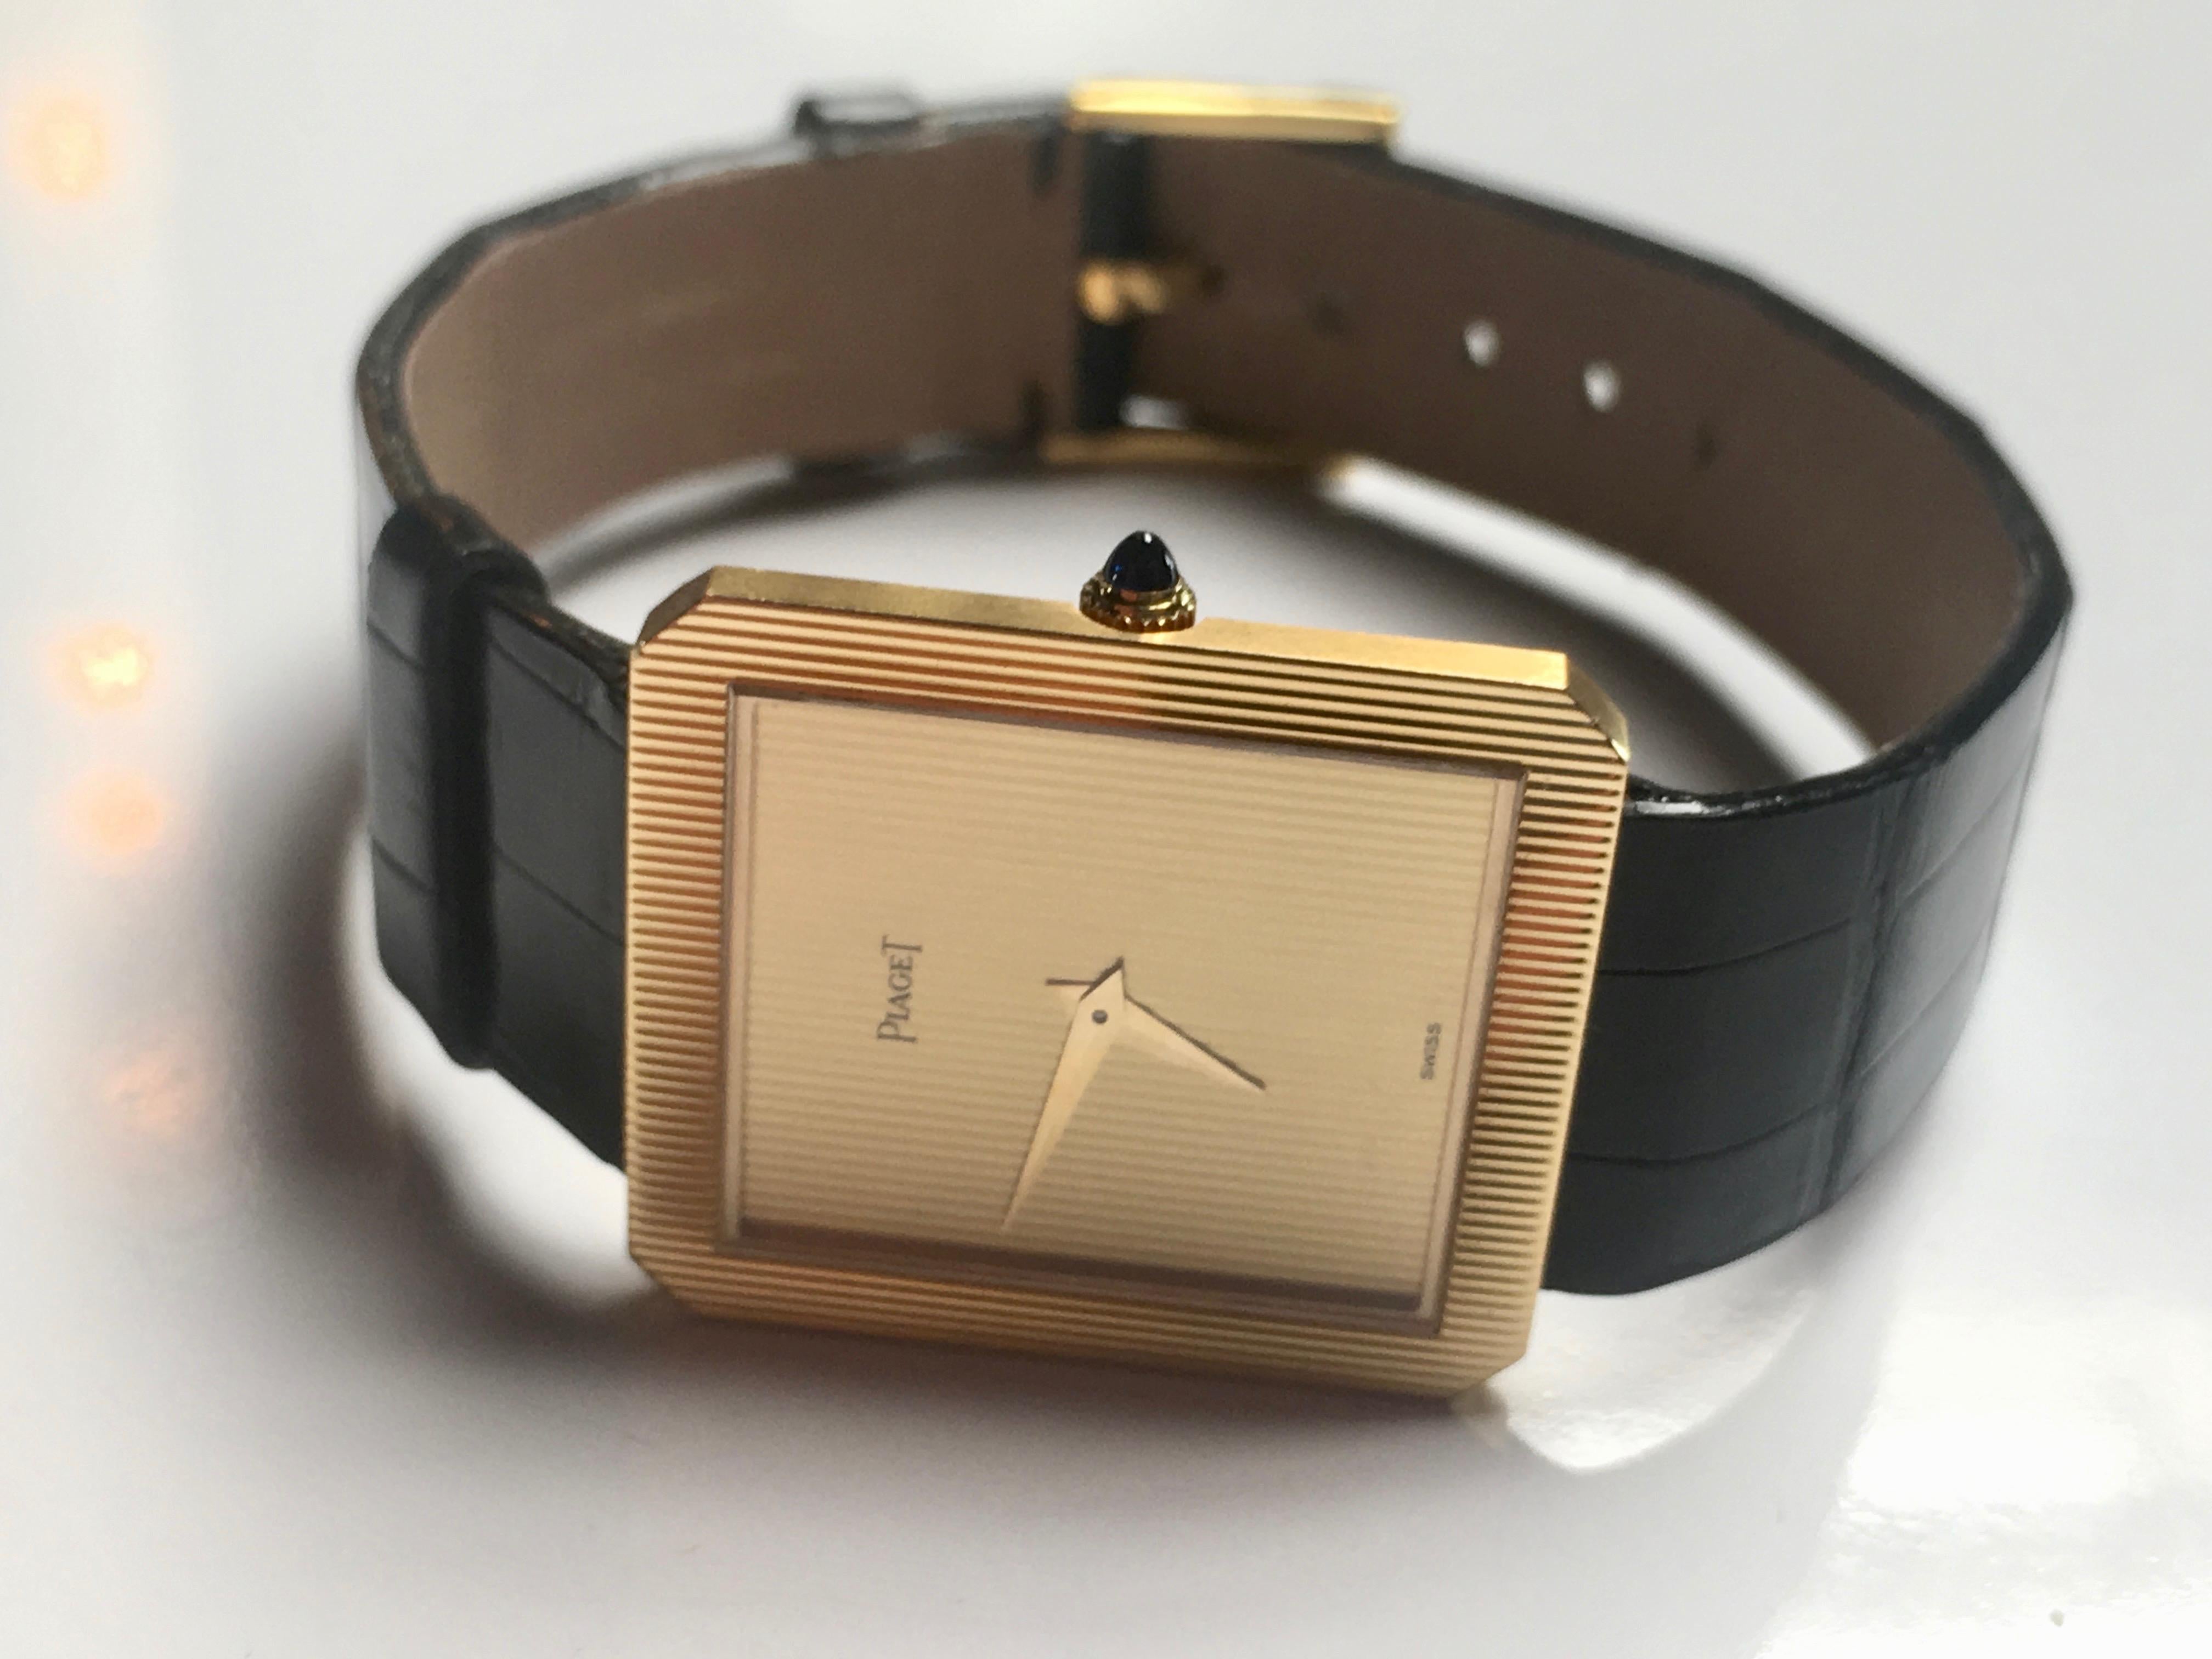 18K yellow gold Piaget Protocole watch circa 1984. 20mm gold case. Black dial with gold hands. Original Piaget crocodile strap, with embossed logo. 18K yellow gold buckle. Mechanical hand winding movement. Sapphire crystal glass. Model number 9154